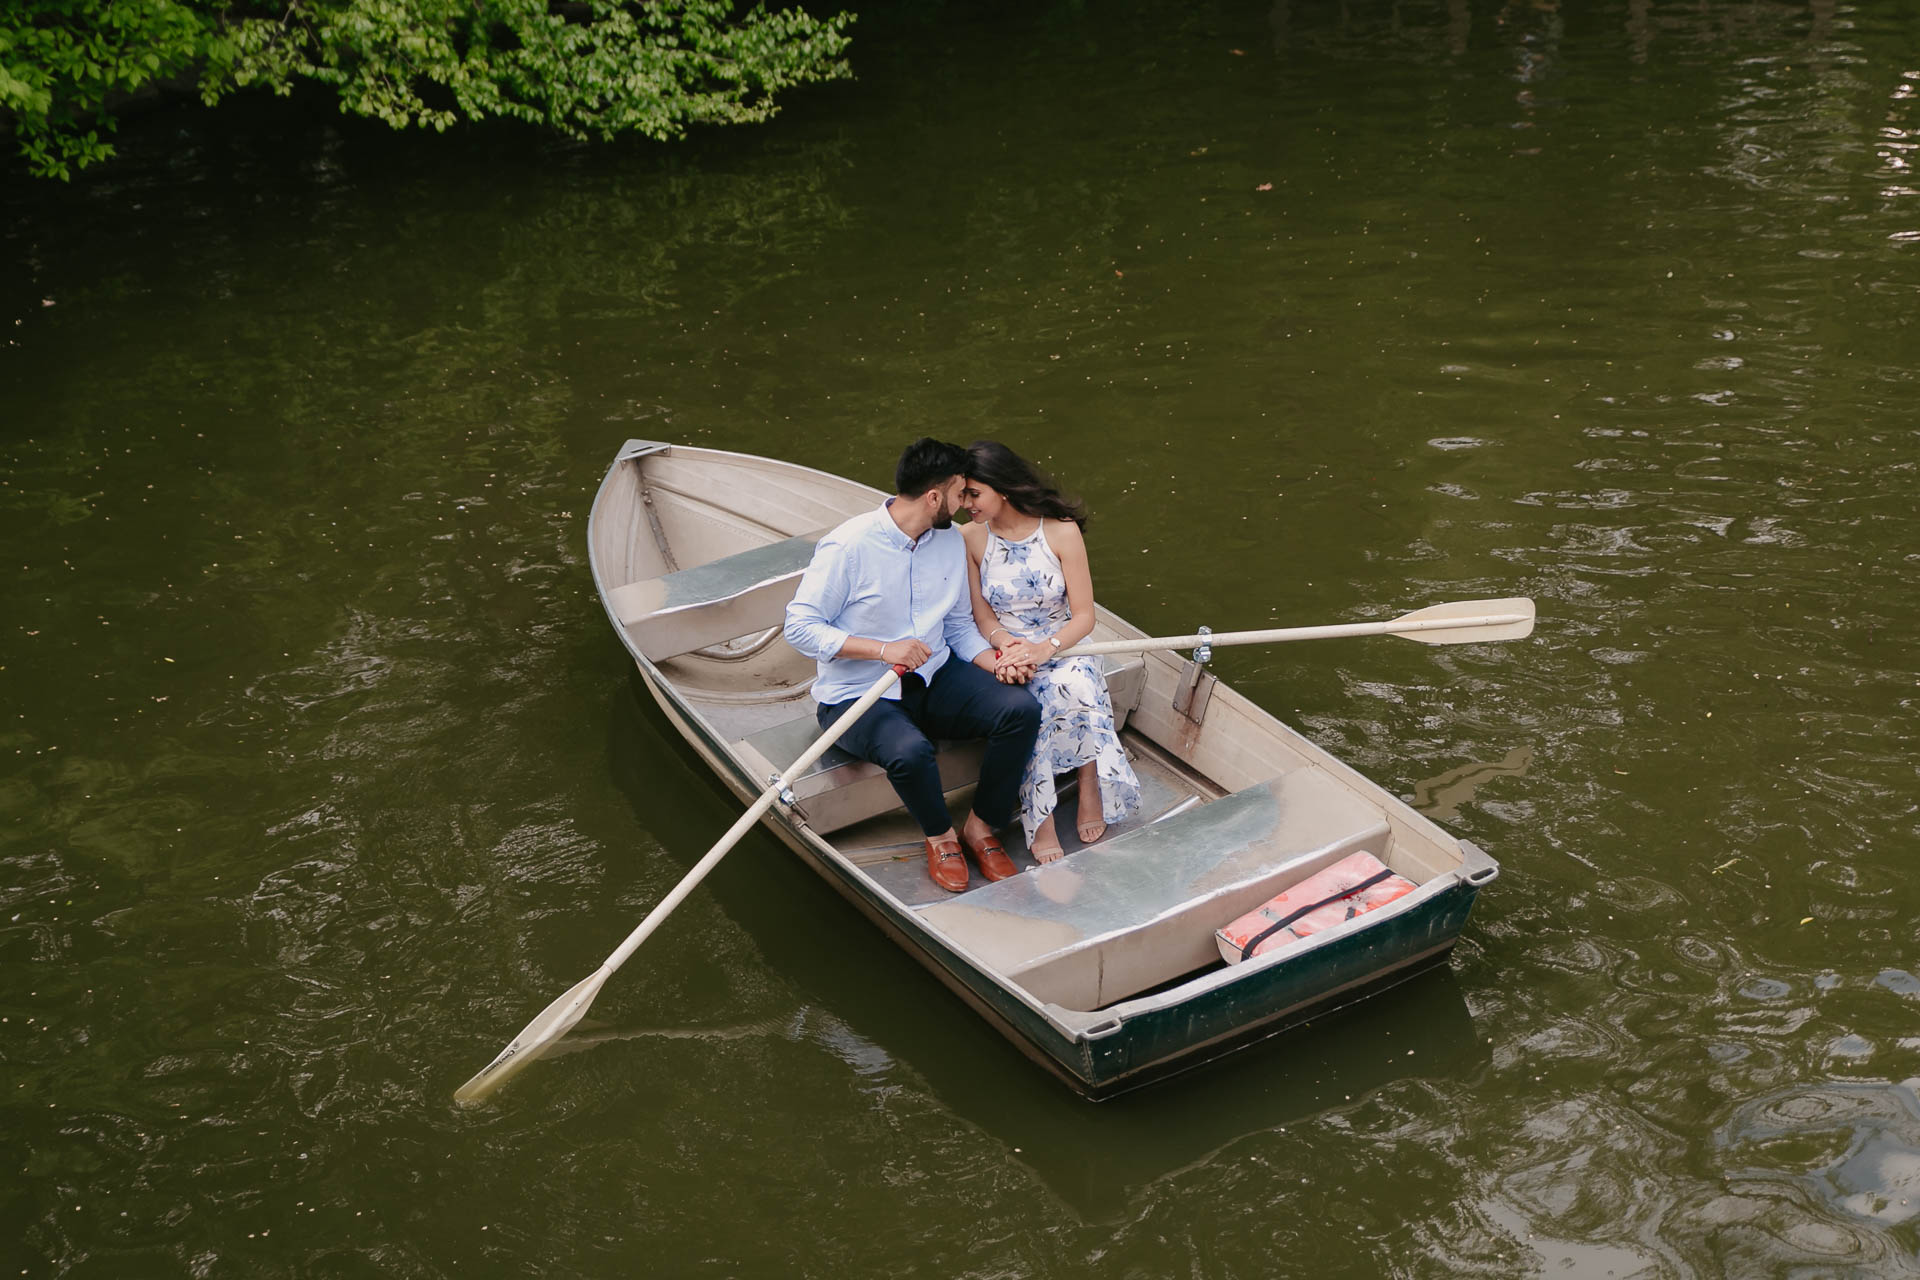 photoshoot on a boat in central park